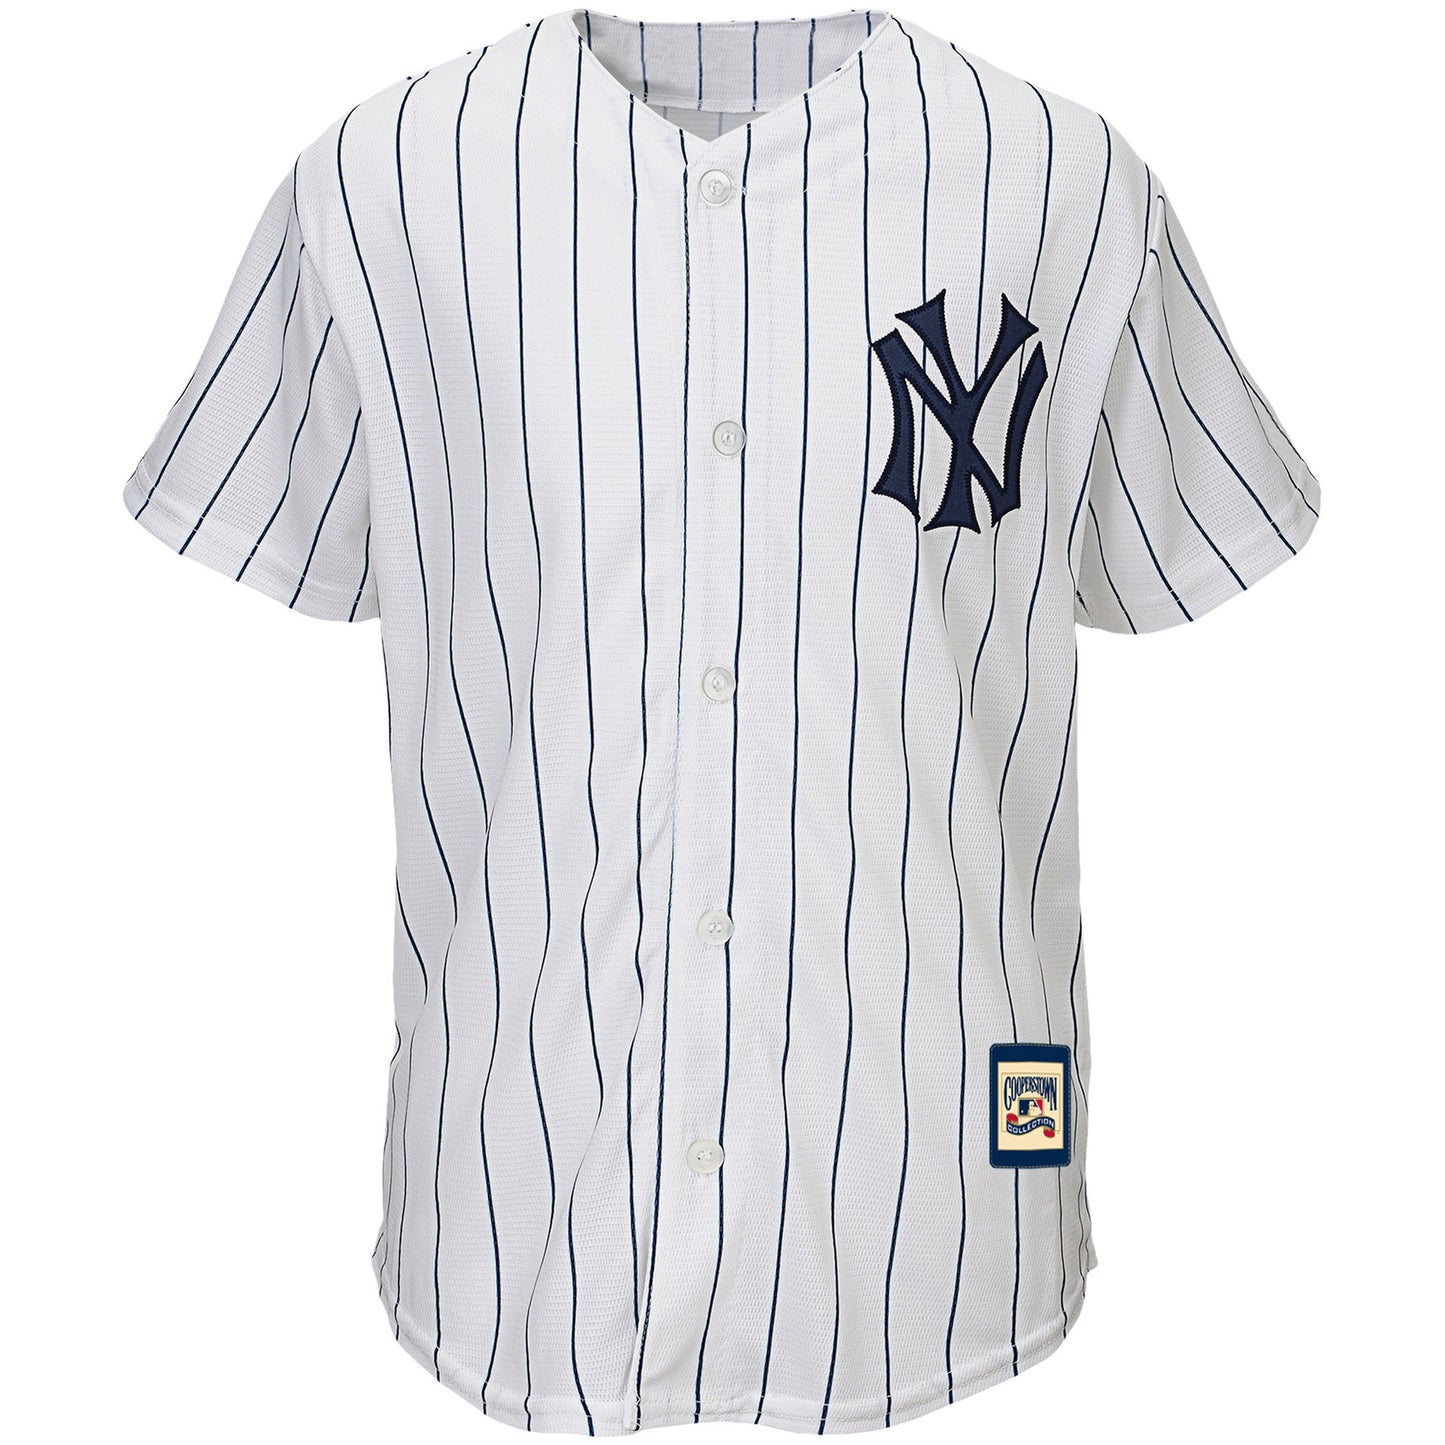 Youth New York Yankees Mickey Mantle White/Navy Cooperstown Collection Replica Player Jersey